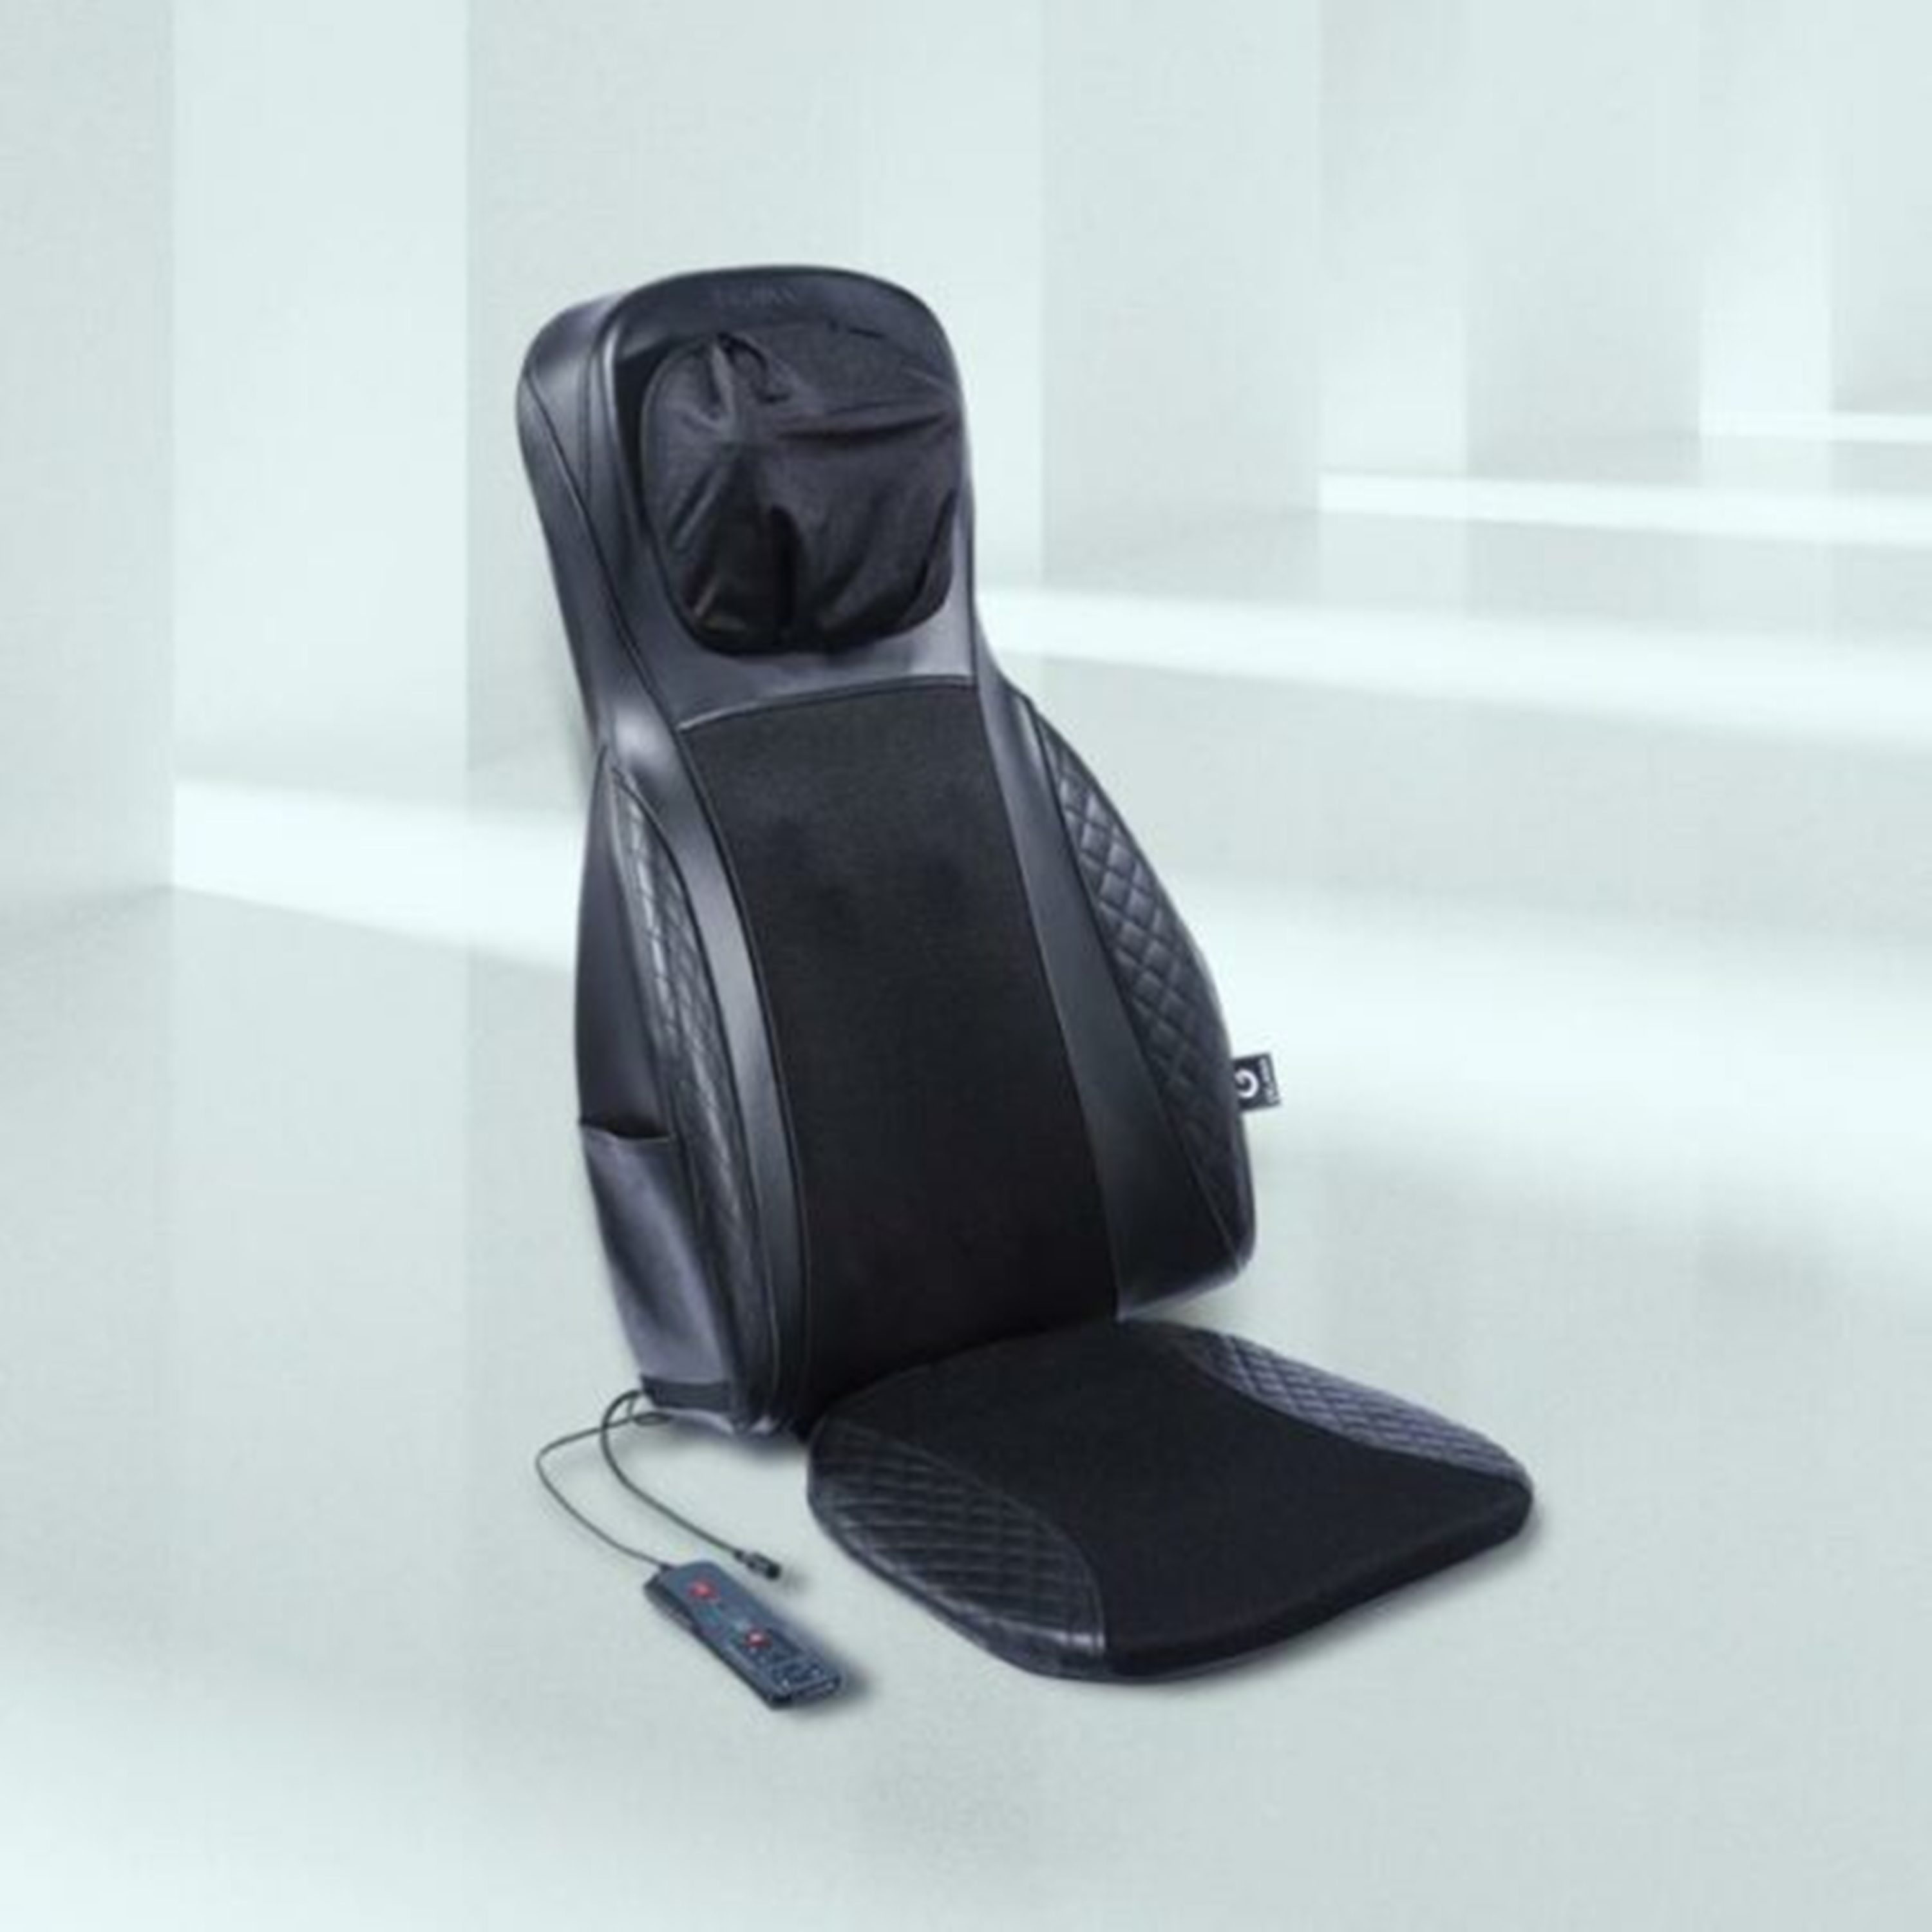  Purchase A Portable Massage Chair To Ease Pain And Tension